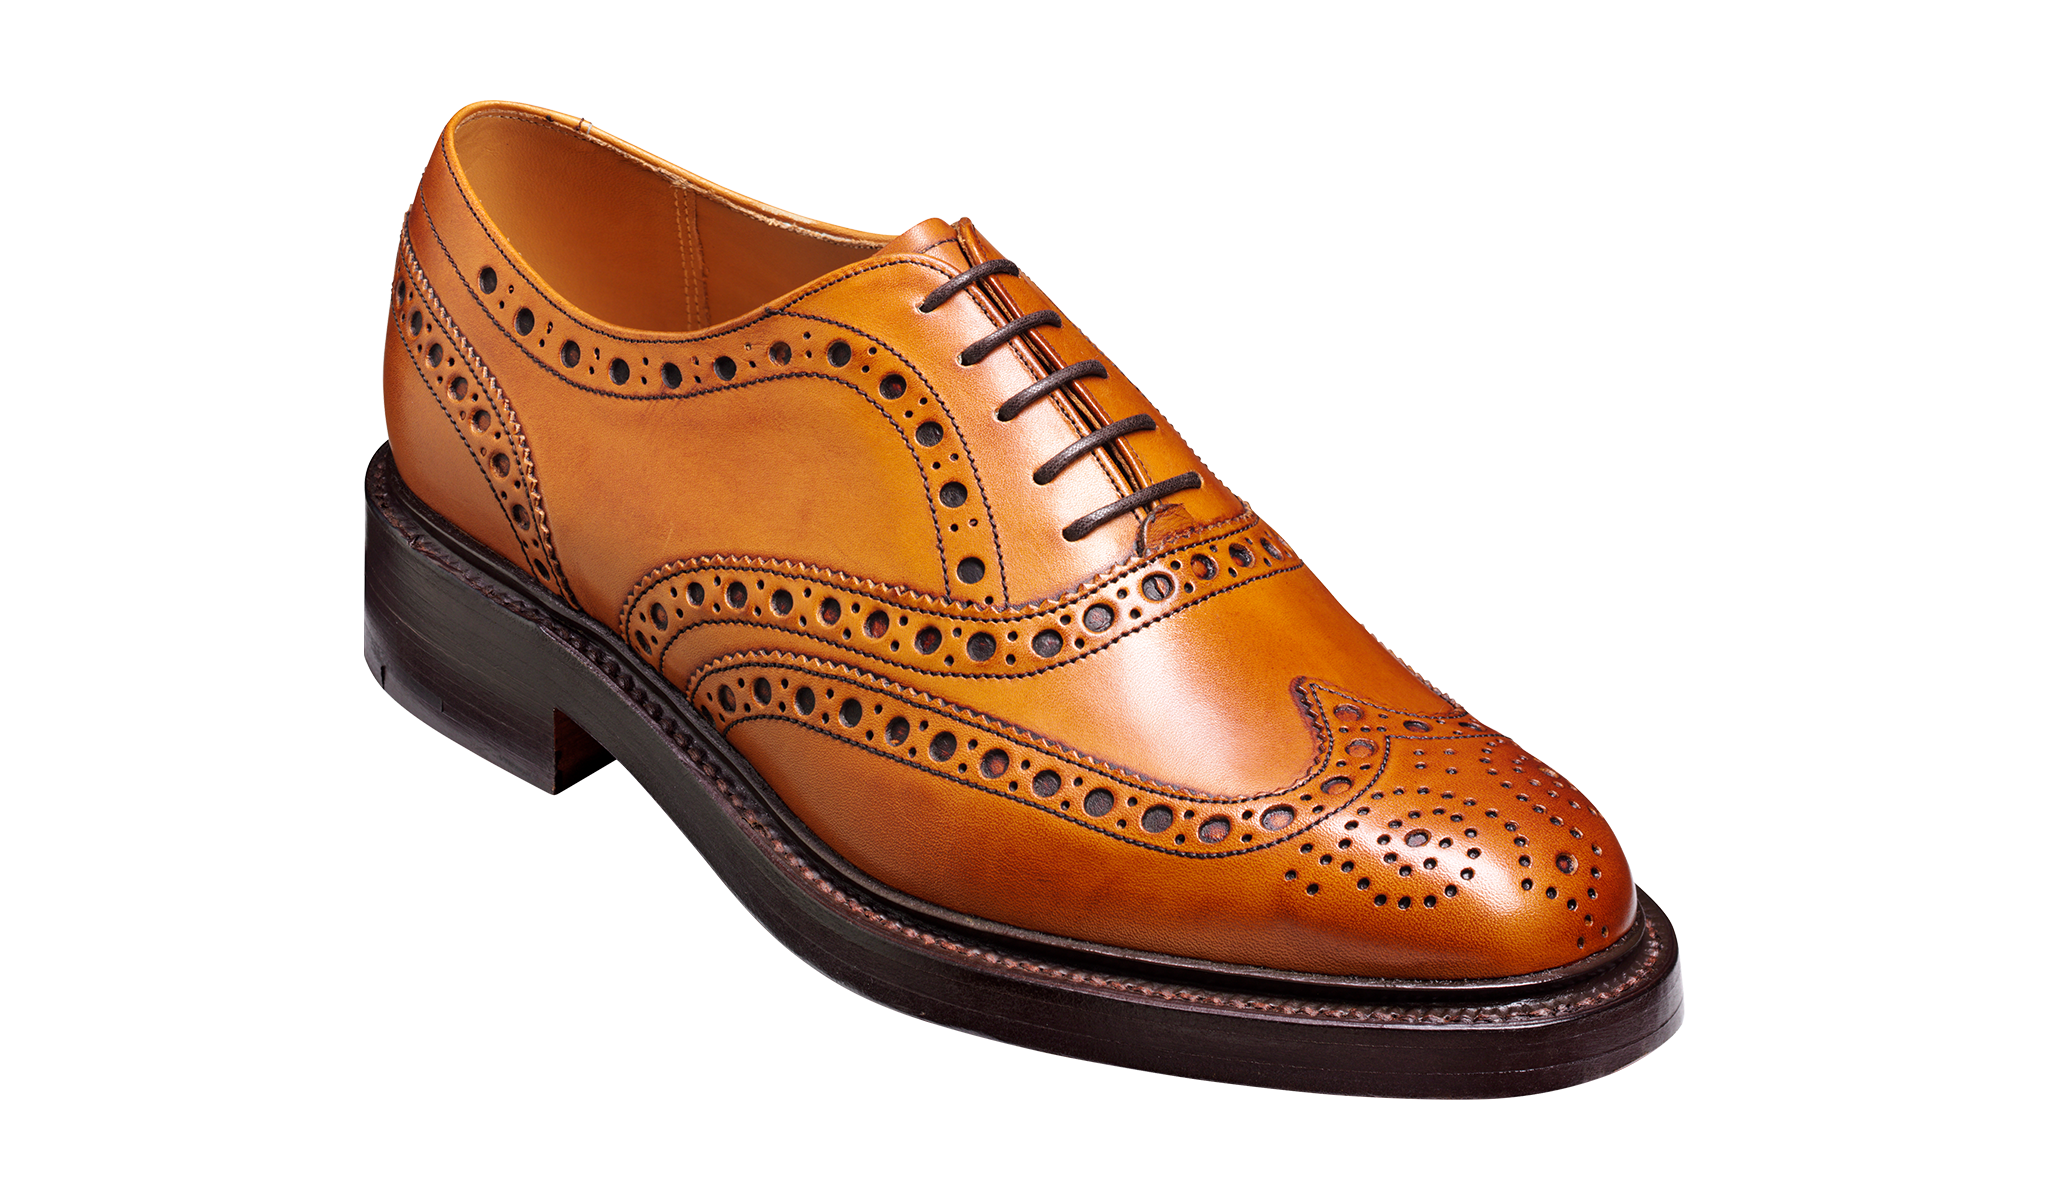 Westfield - A brown leather mens brogue shoe by Barker.